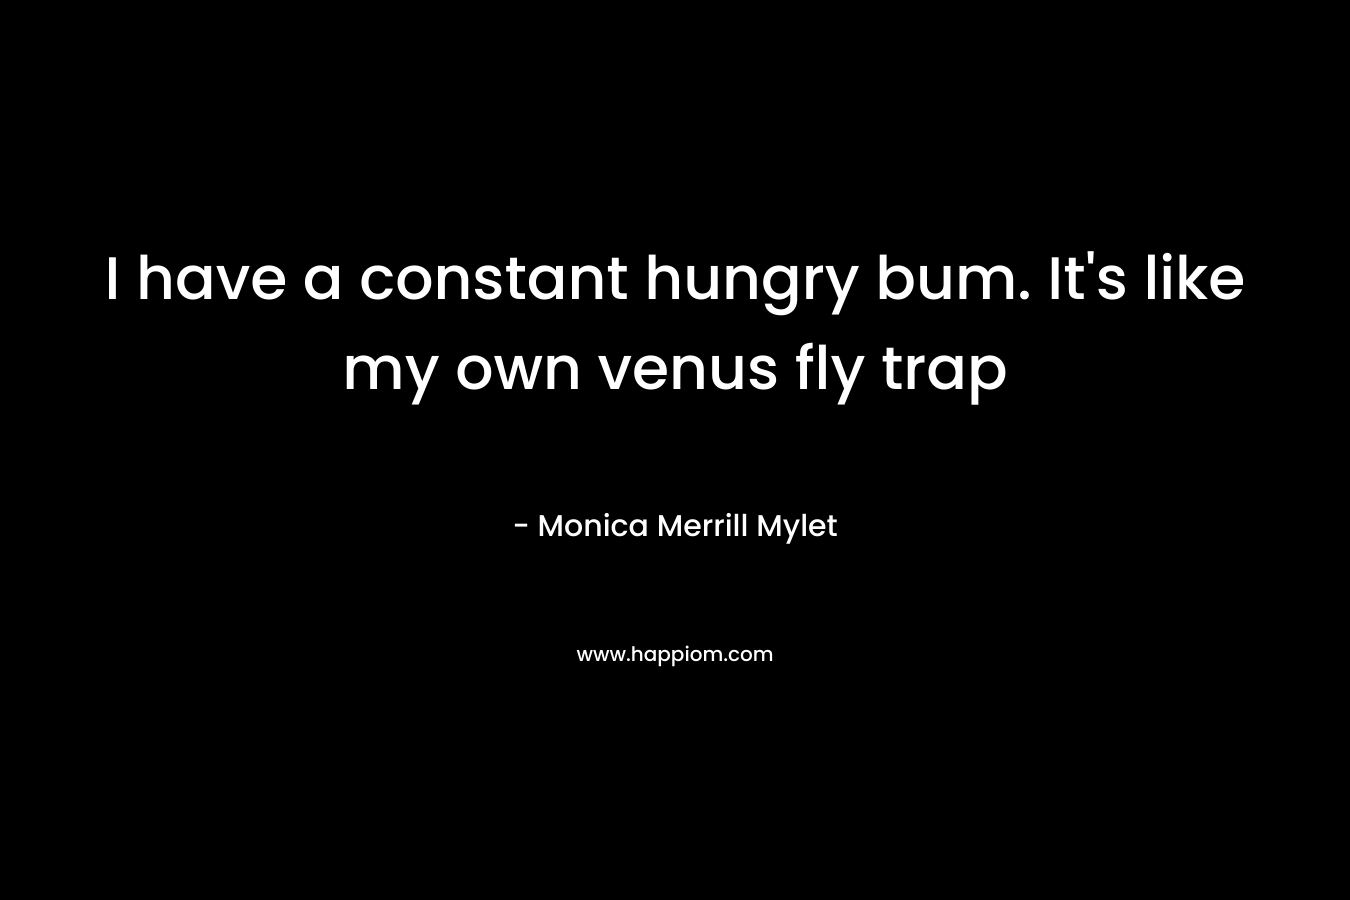 I have a constant hungry bum. It’s like my own venus fly trap – Monica Merrill Mylet